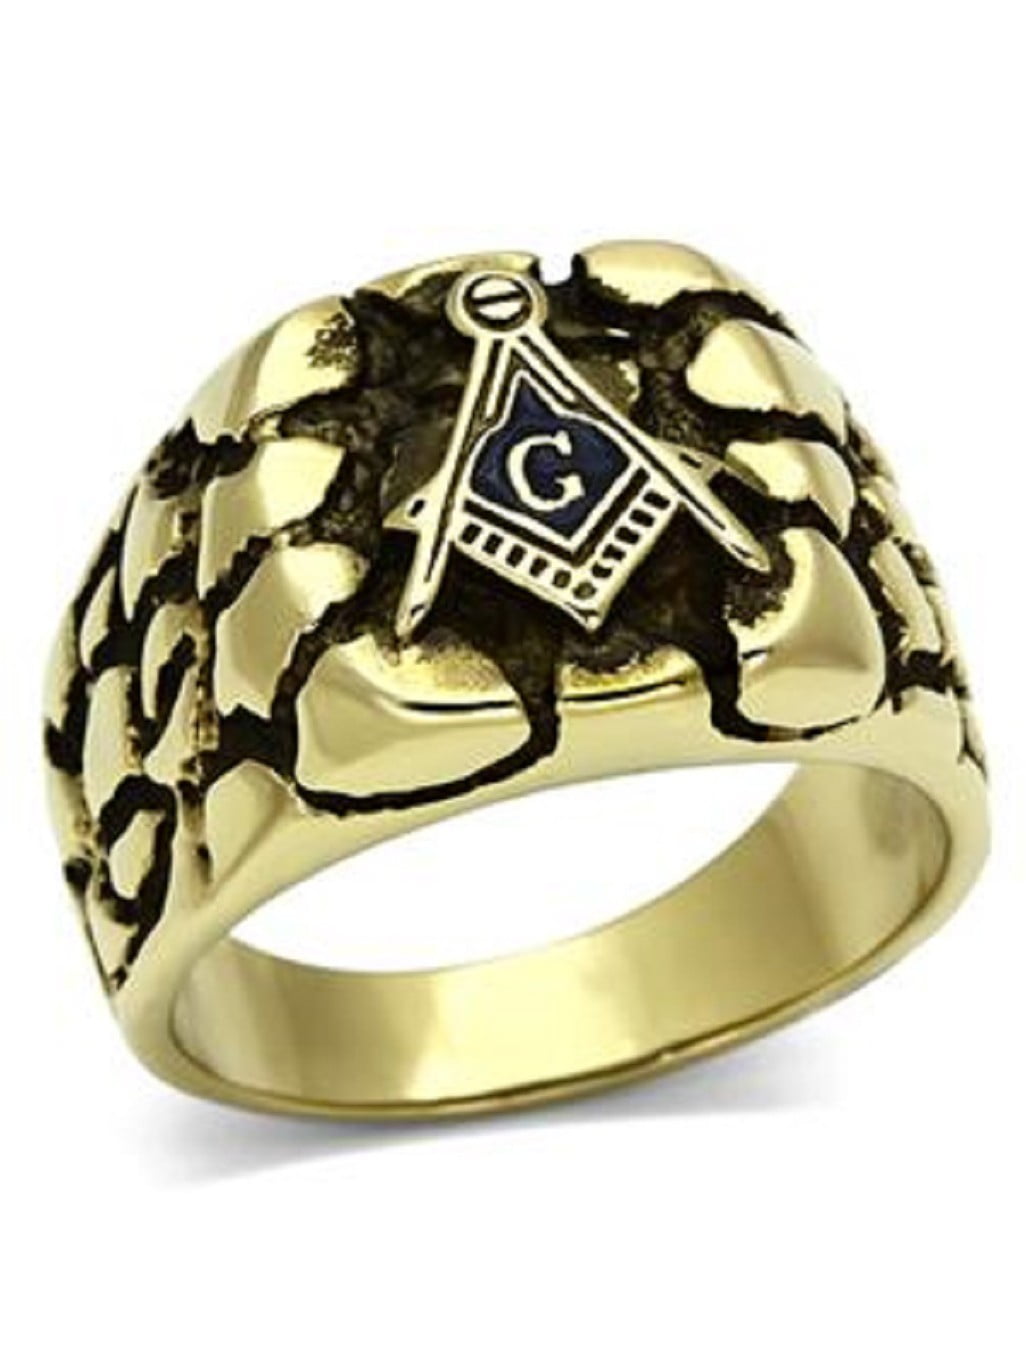 Stainless Steel & Antiqued Clear Stones MASONIC FREEMASON Finger Ring Size 10 